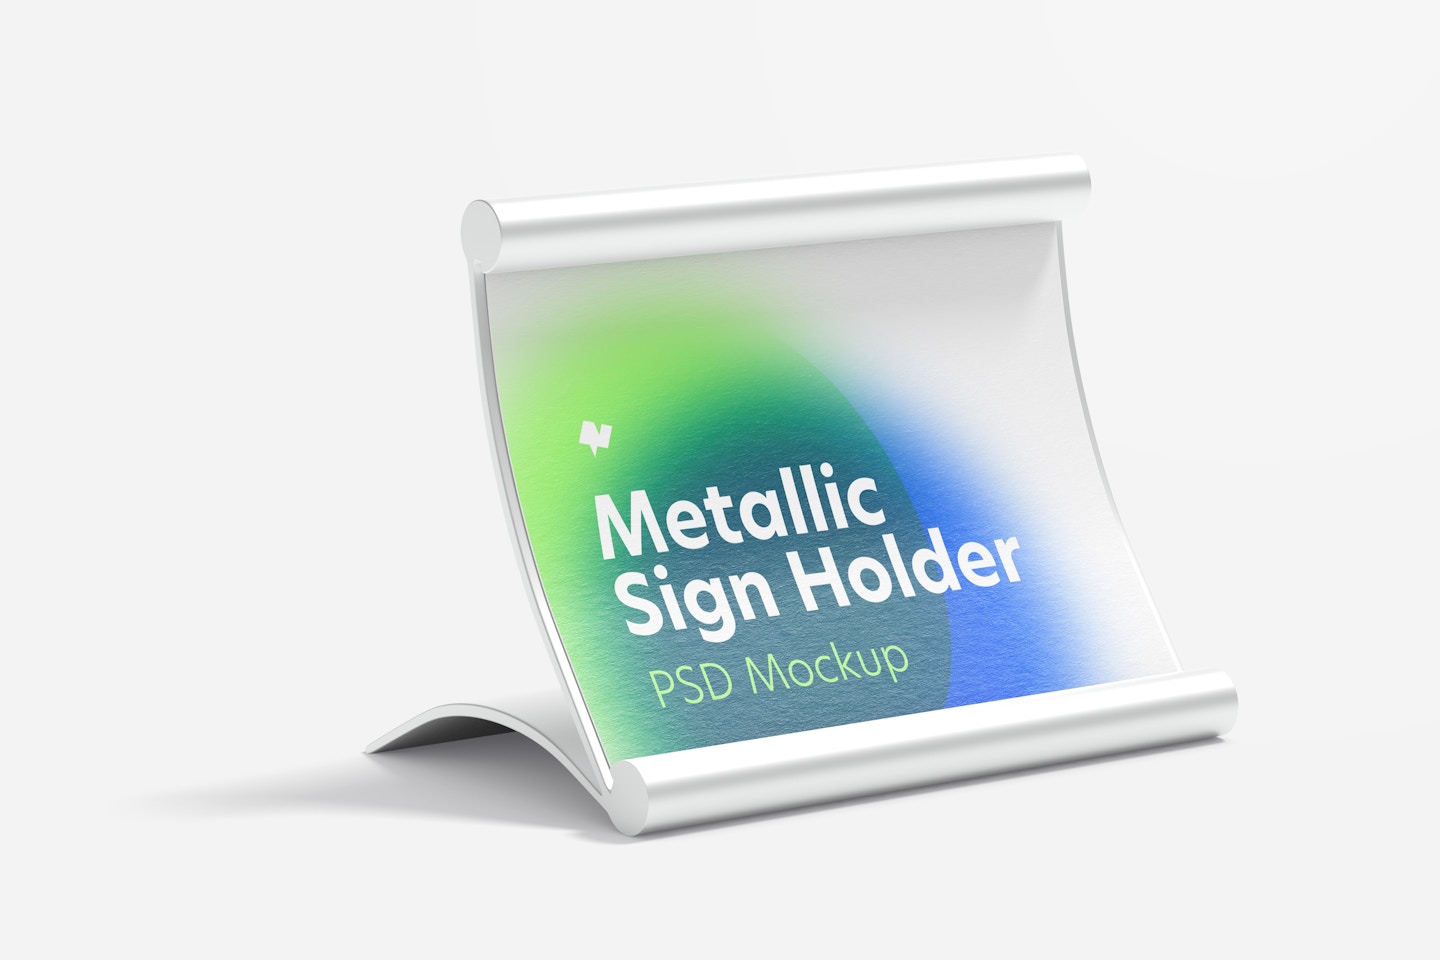 Metallic Table Sign Holder Mockup, Right View